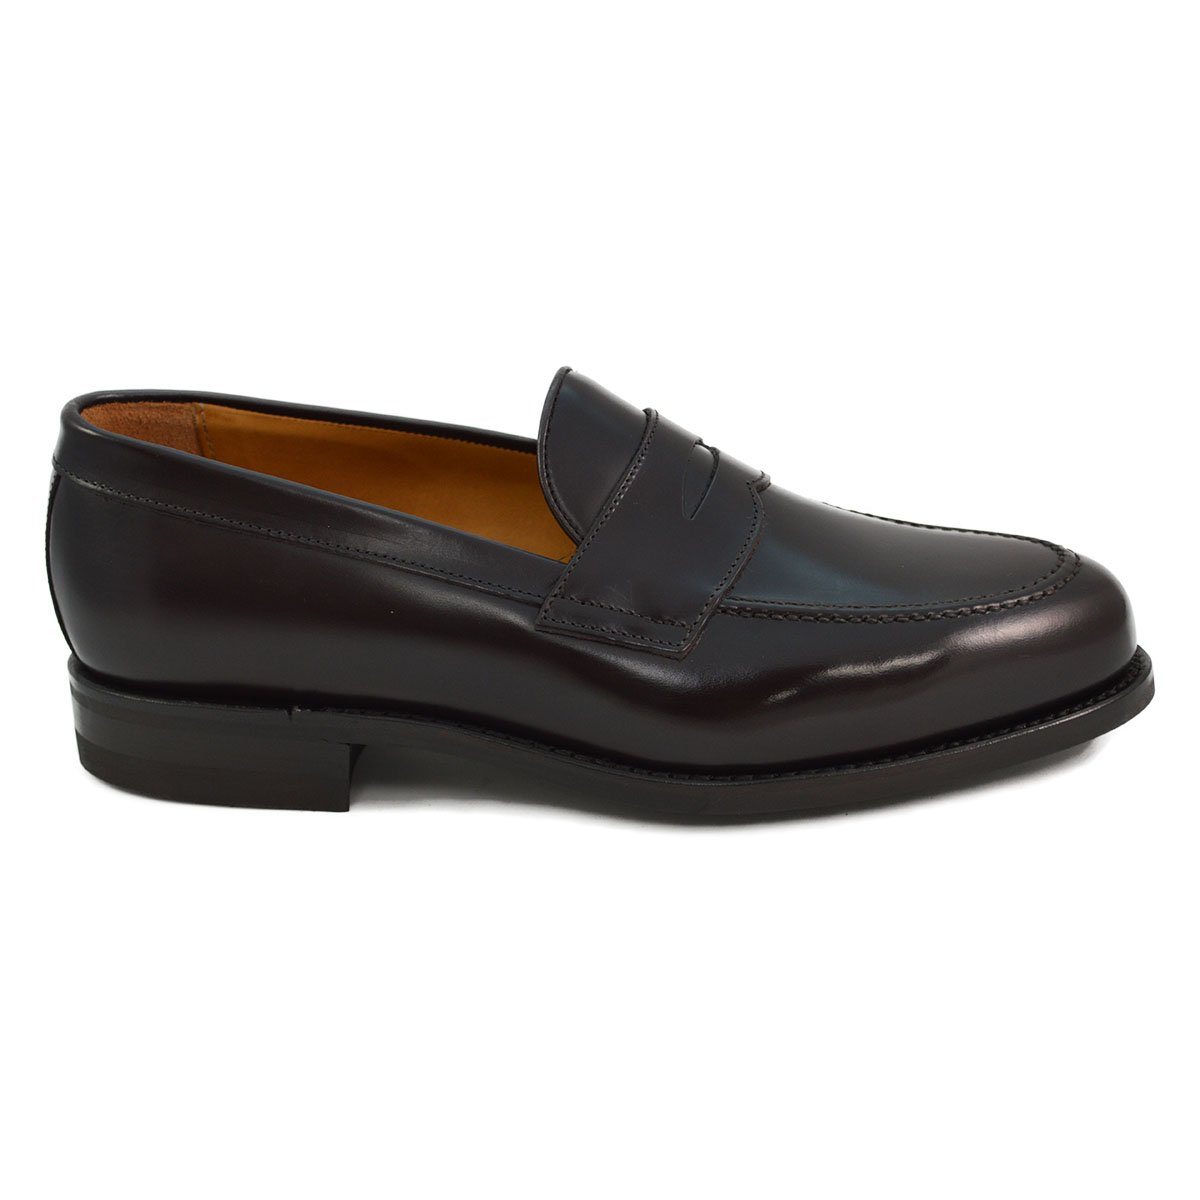 Berwick 1707 Penny Loafer (9628)- Dark Brown Dainite – A Fine Pair of Shoes